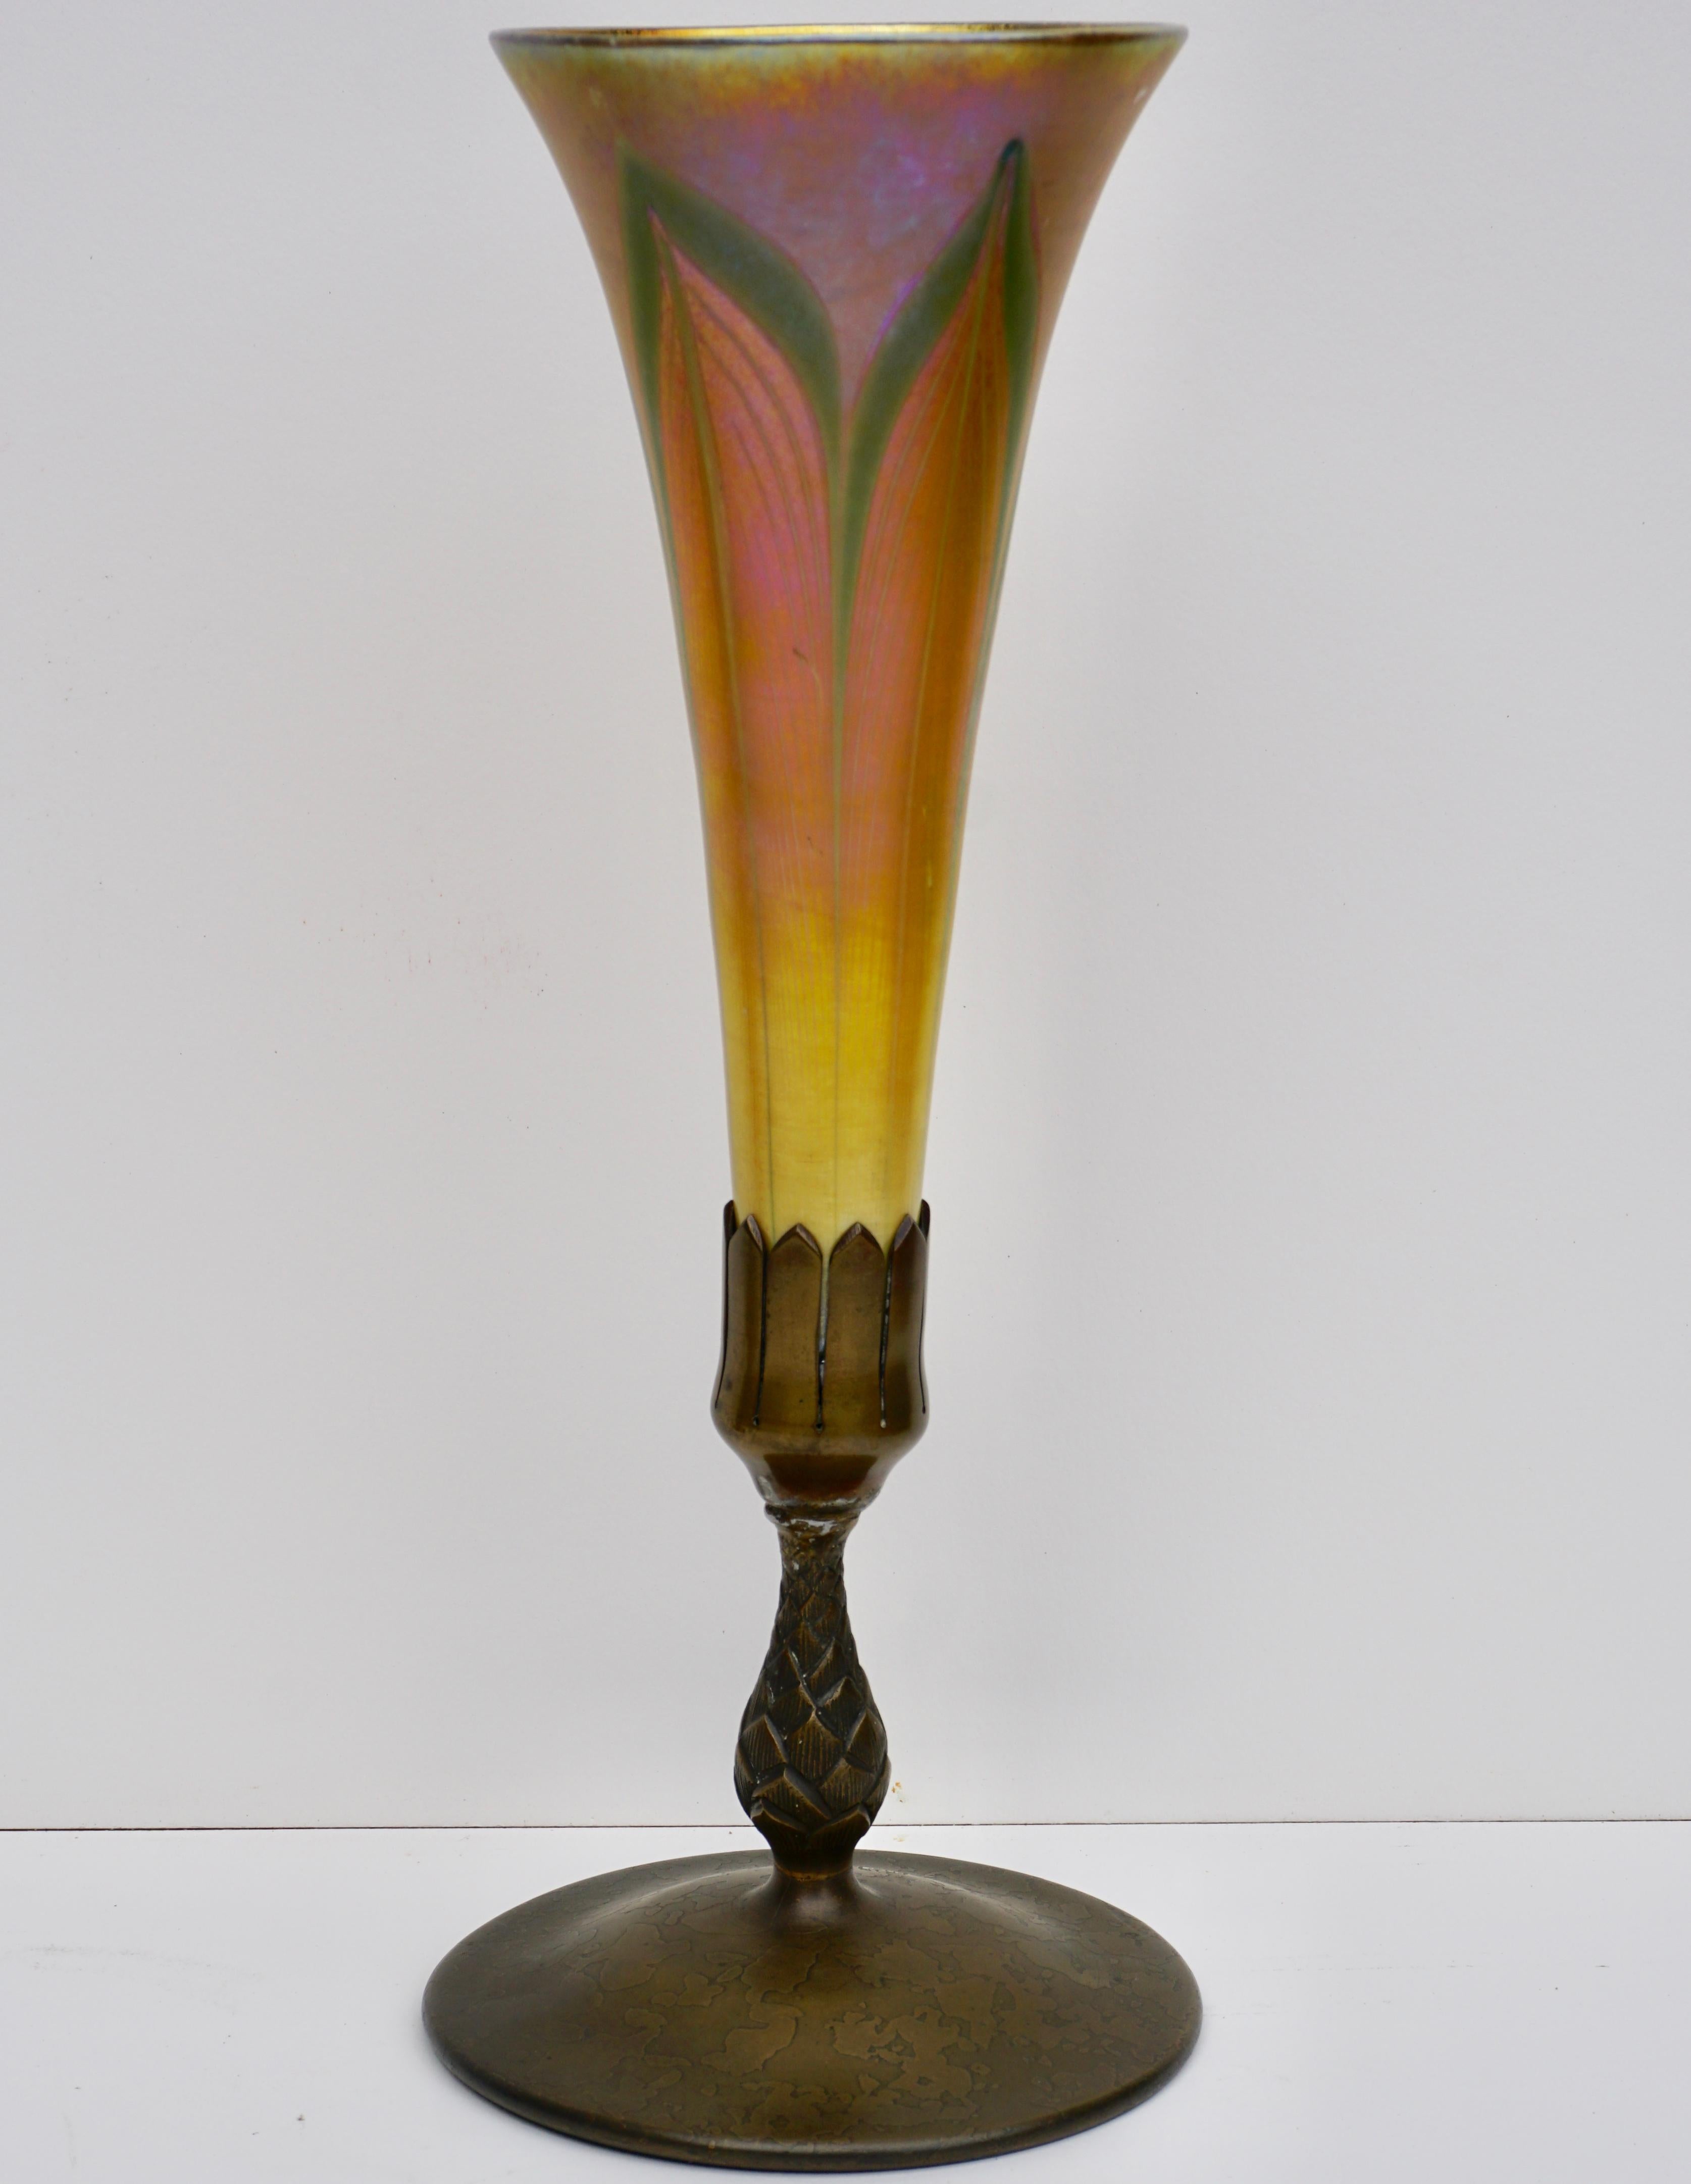 The gold trumpet-form green and white feather pulled favrile glass upper vase marked L.C.T. sitting on a bronze base with a pineapple stem and circular foot, circa 1900.

Base marked Tiffany Studios NEW YORK and numbered 1043. Monogrammed